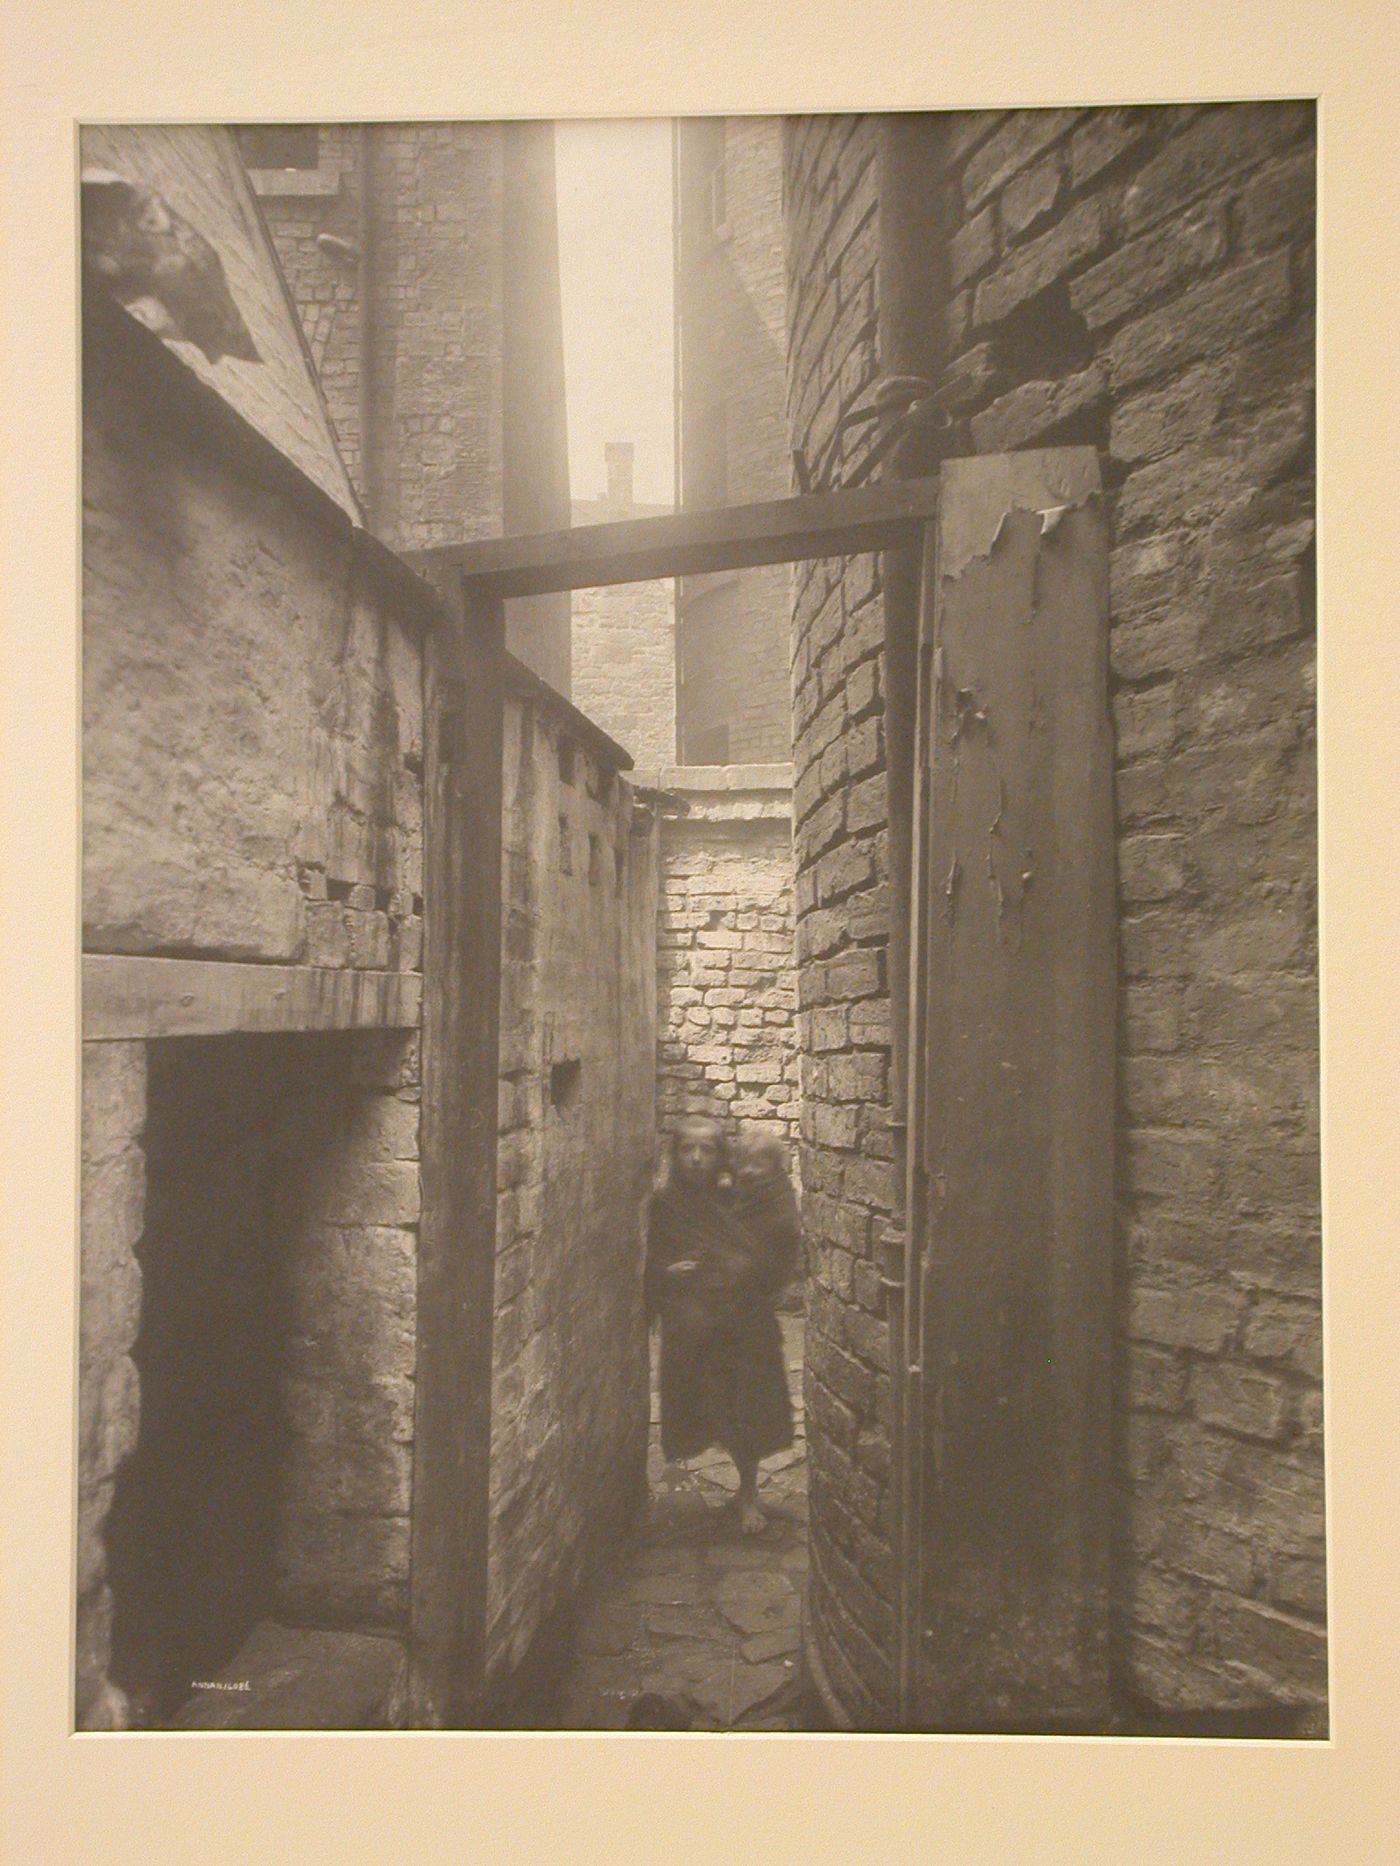 View of a narrow passage with a little girl holding a baby, Glasgow, Scotland